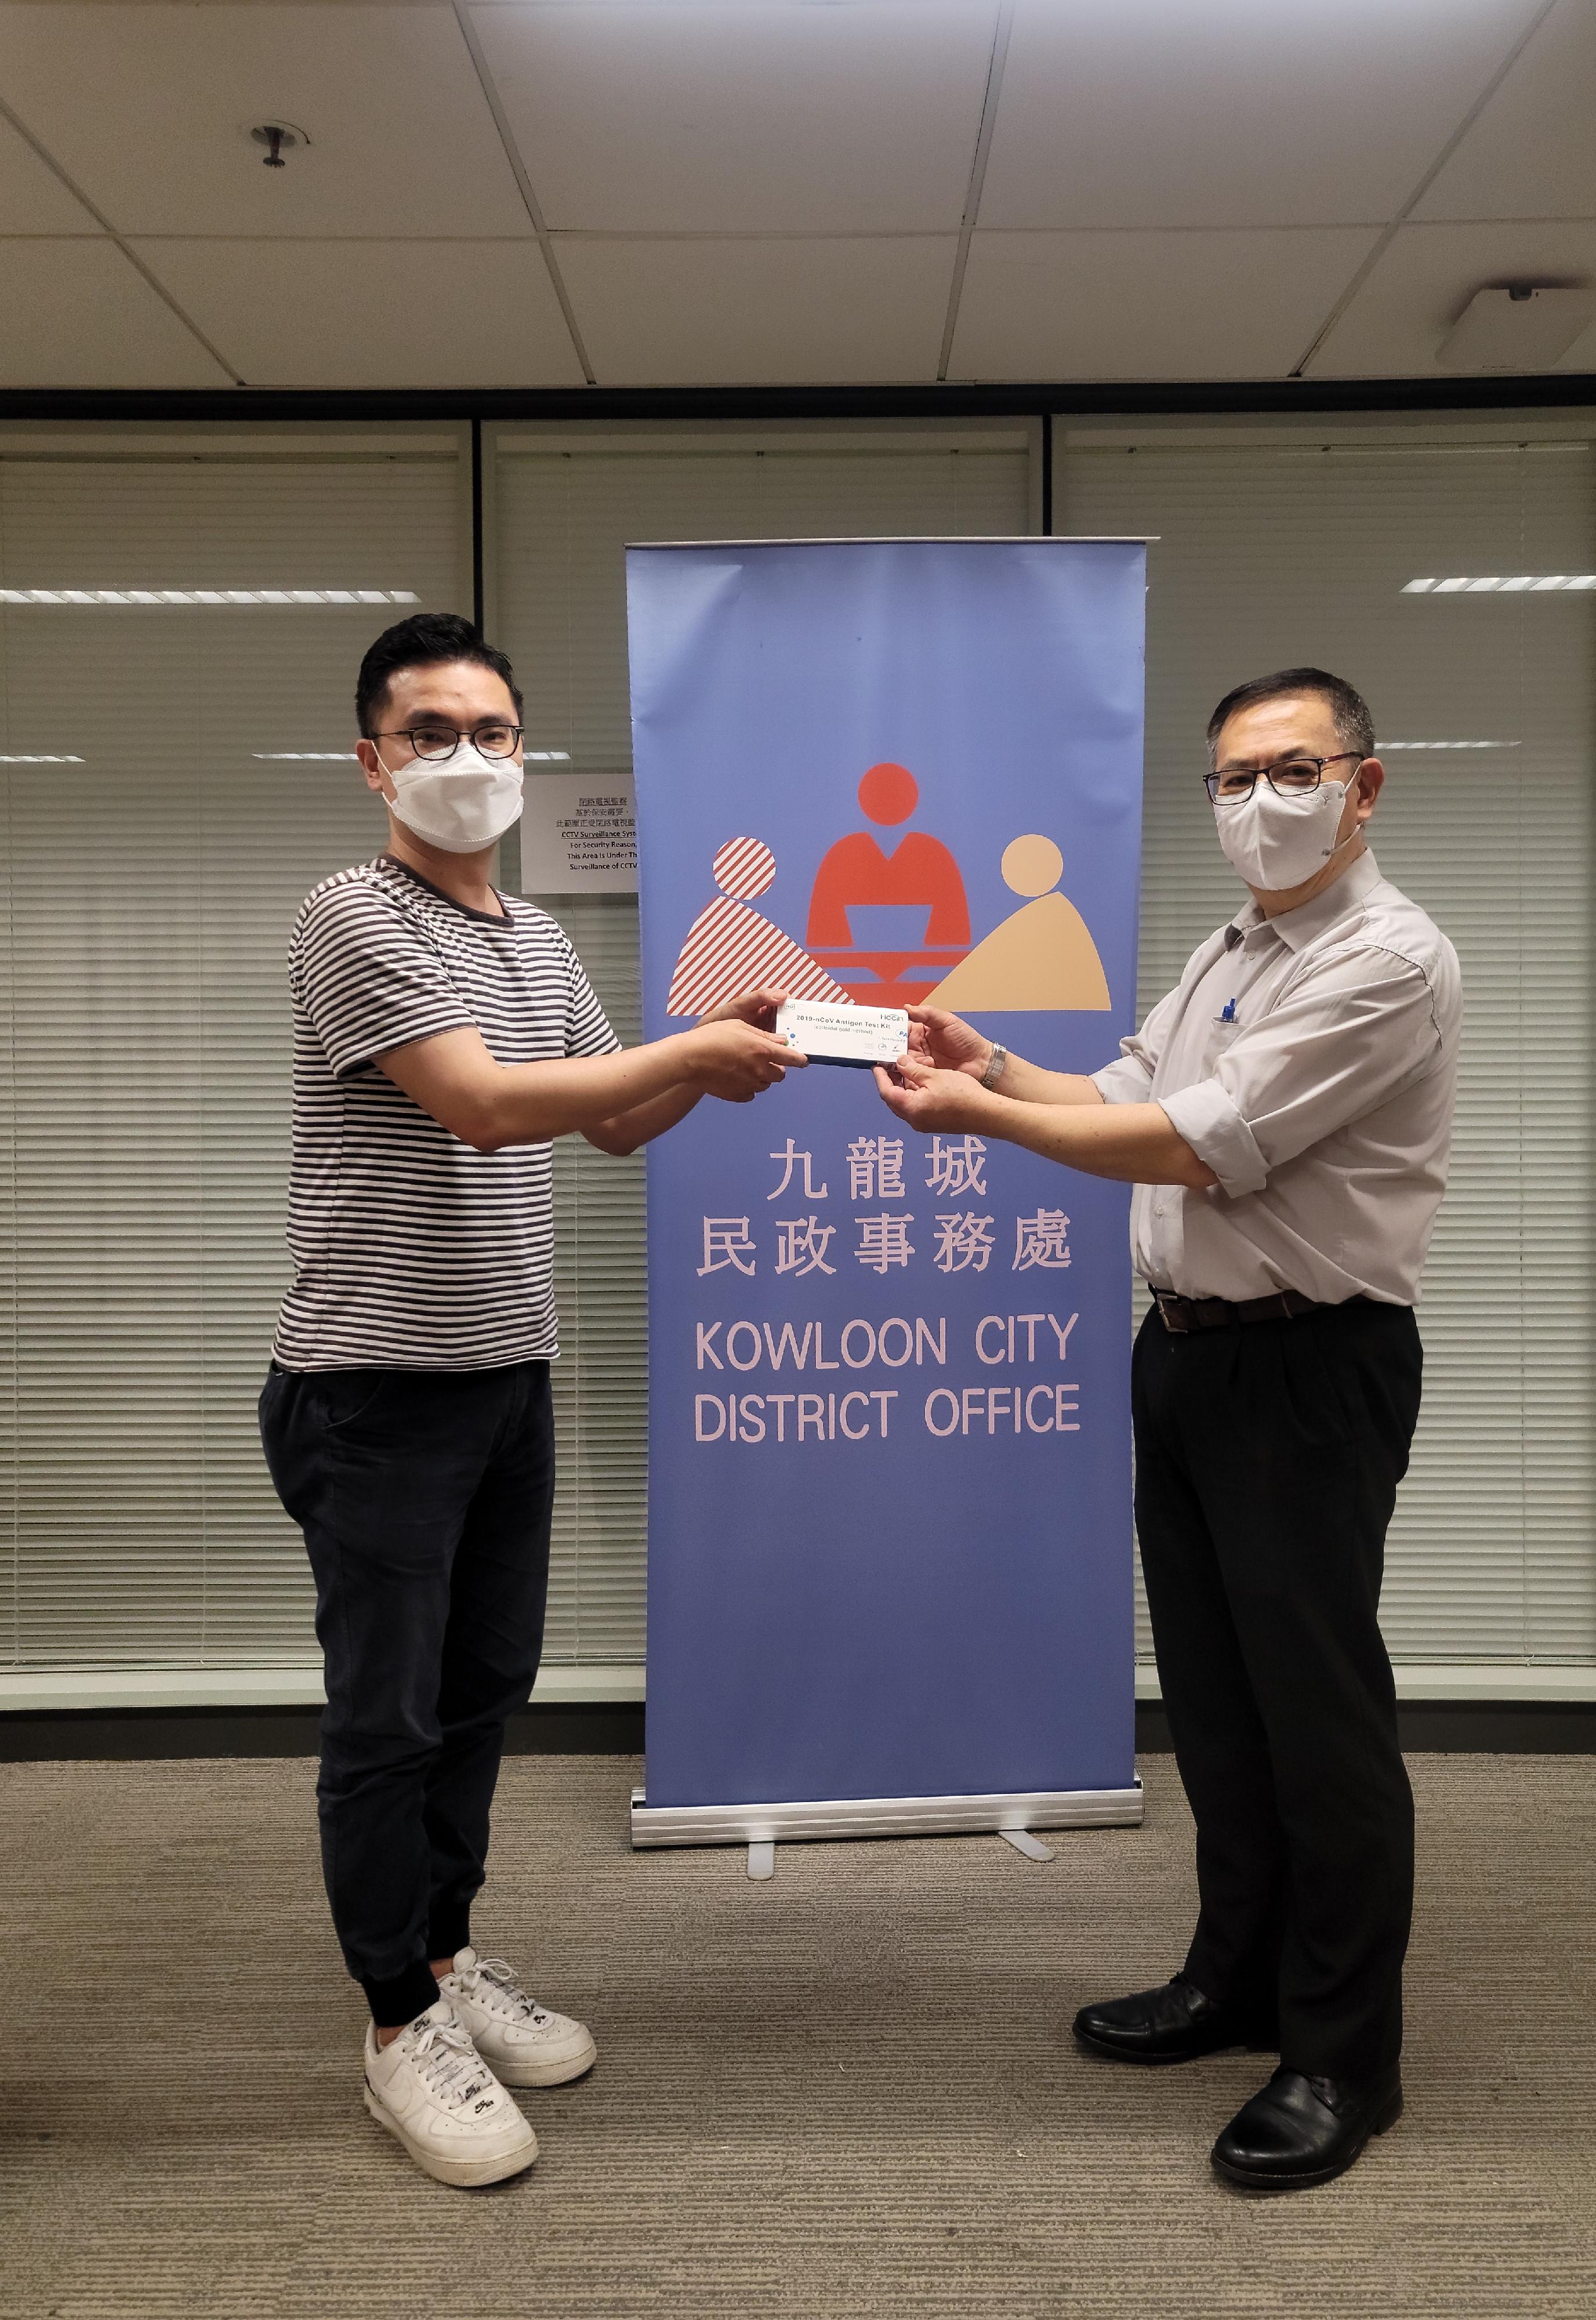 The Kowloon City District Office today (May 20) distributed COVID-19 rapid test kits to households, cleansing workers and property management staff living and working in Harbourfront Landmark for voluntary testing through the property management company.